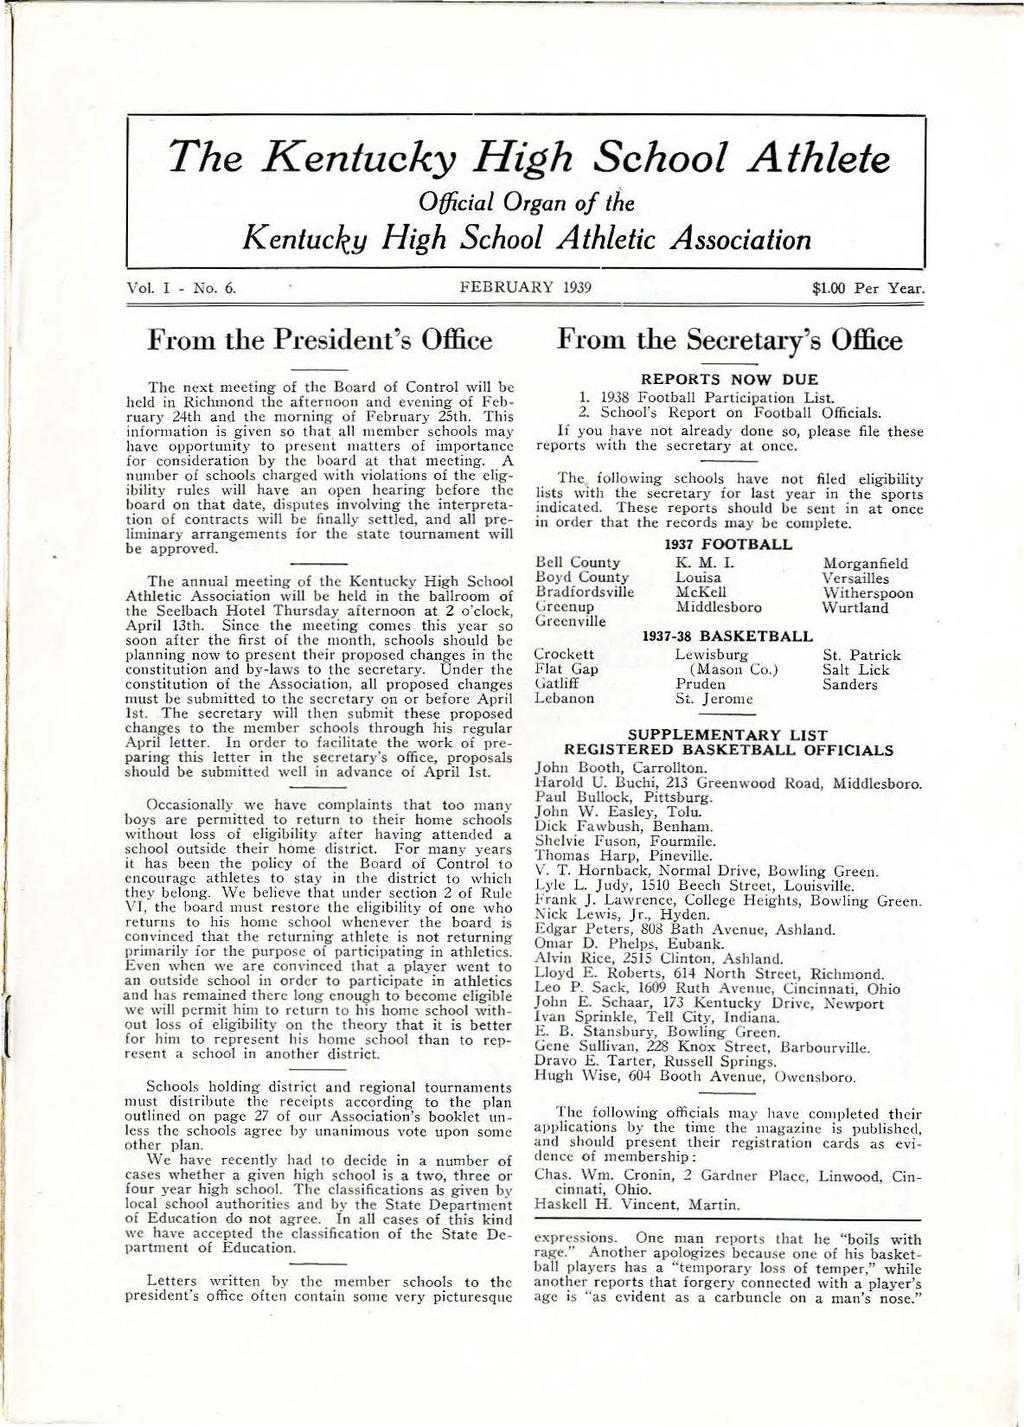 The Kentucky Hgh School Athlete Offcal Organ of the Kentucky Hgh School Athletc Assocaton Vol. - No. 6. FEBRUARY 1939 $1.00 P er Year.